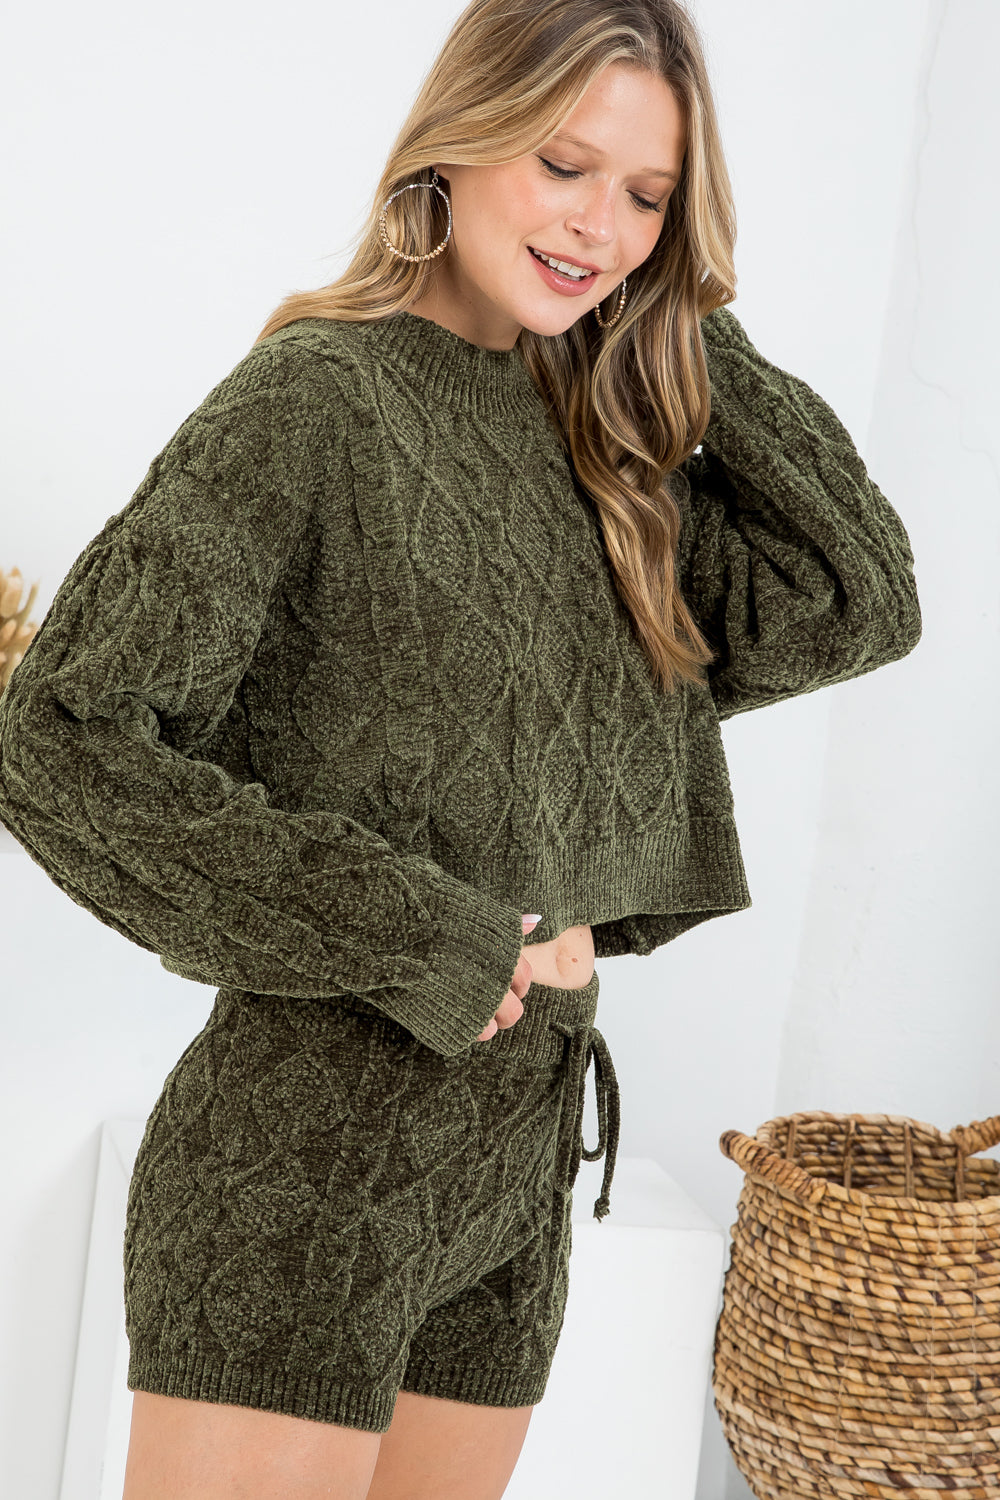 Long Sleeve Croped Top with Stringed Short Pant Sweater Set